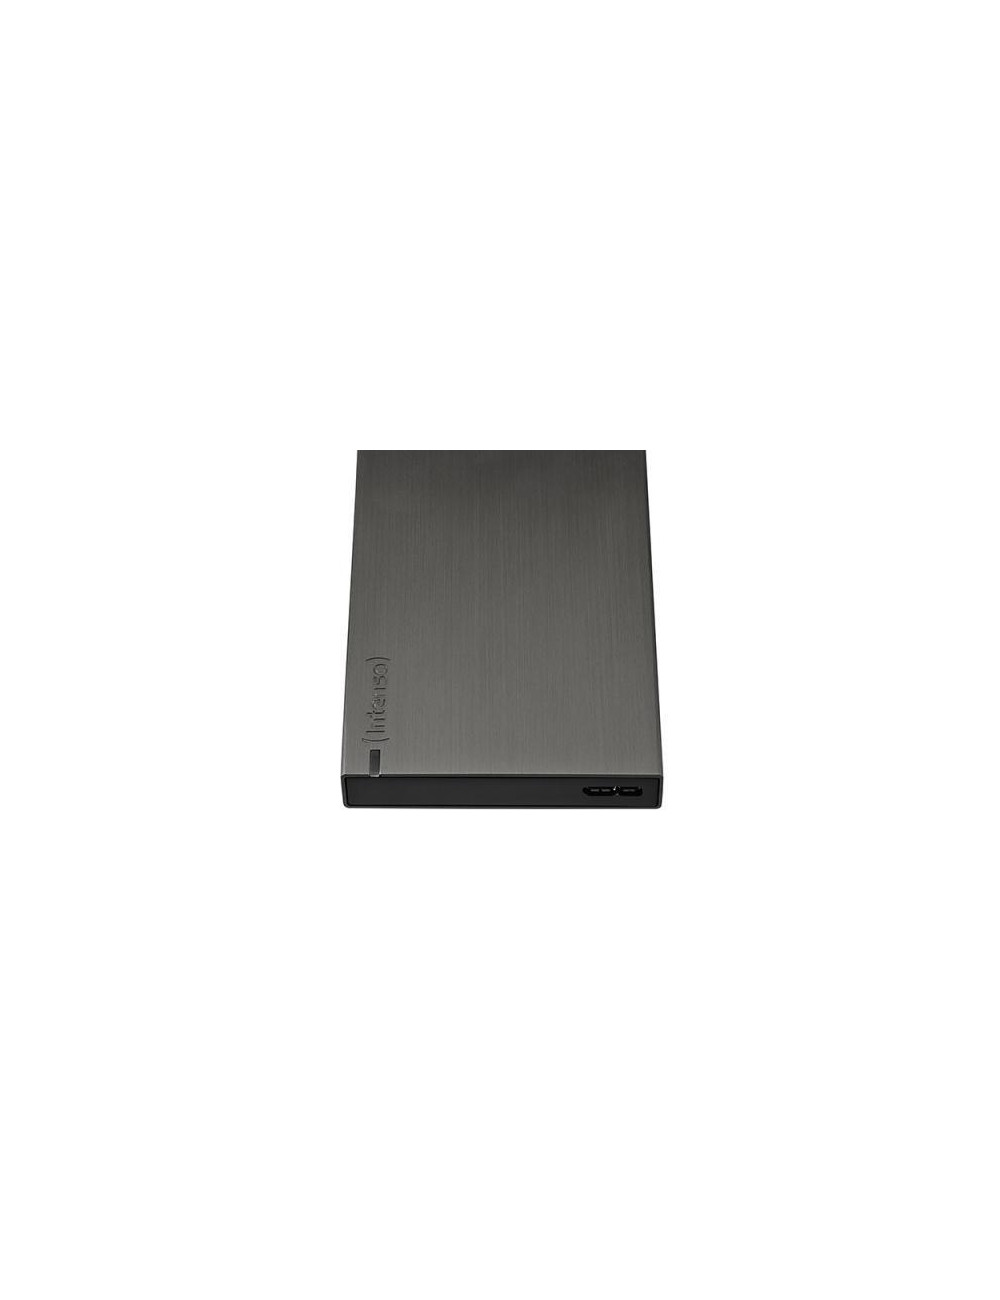 External HDD|INTENSO|1TB|USB 3.0|Colour Anthracite|6028660